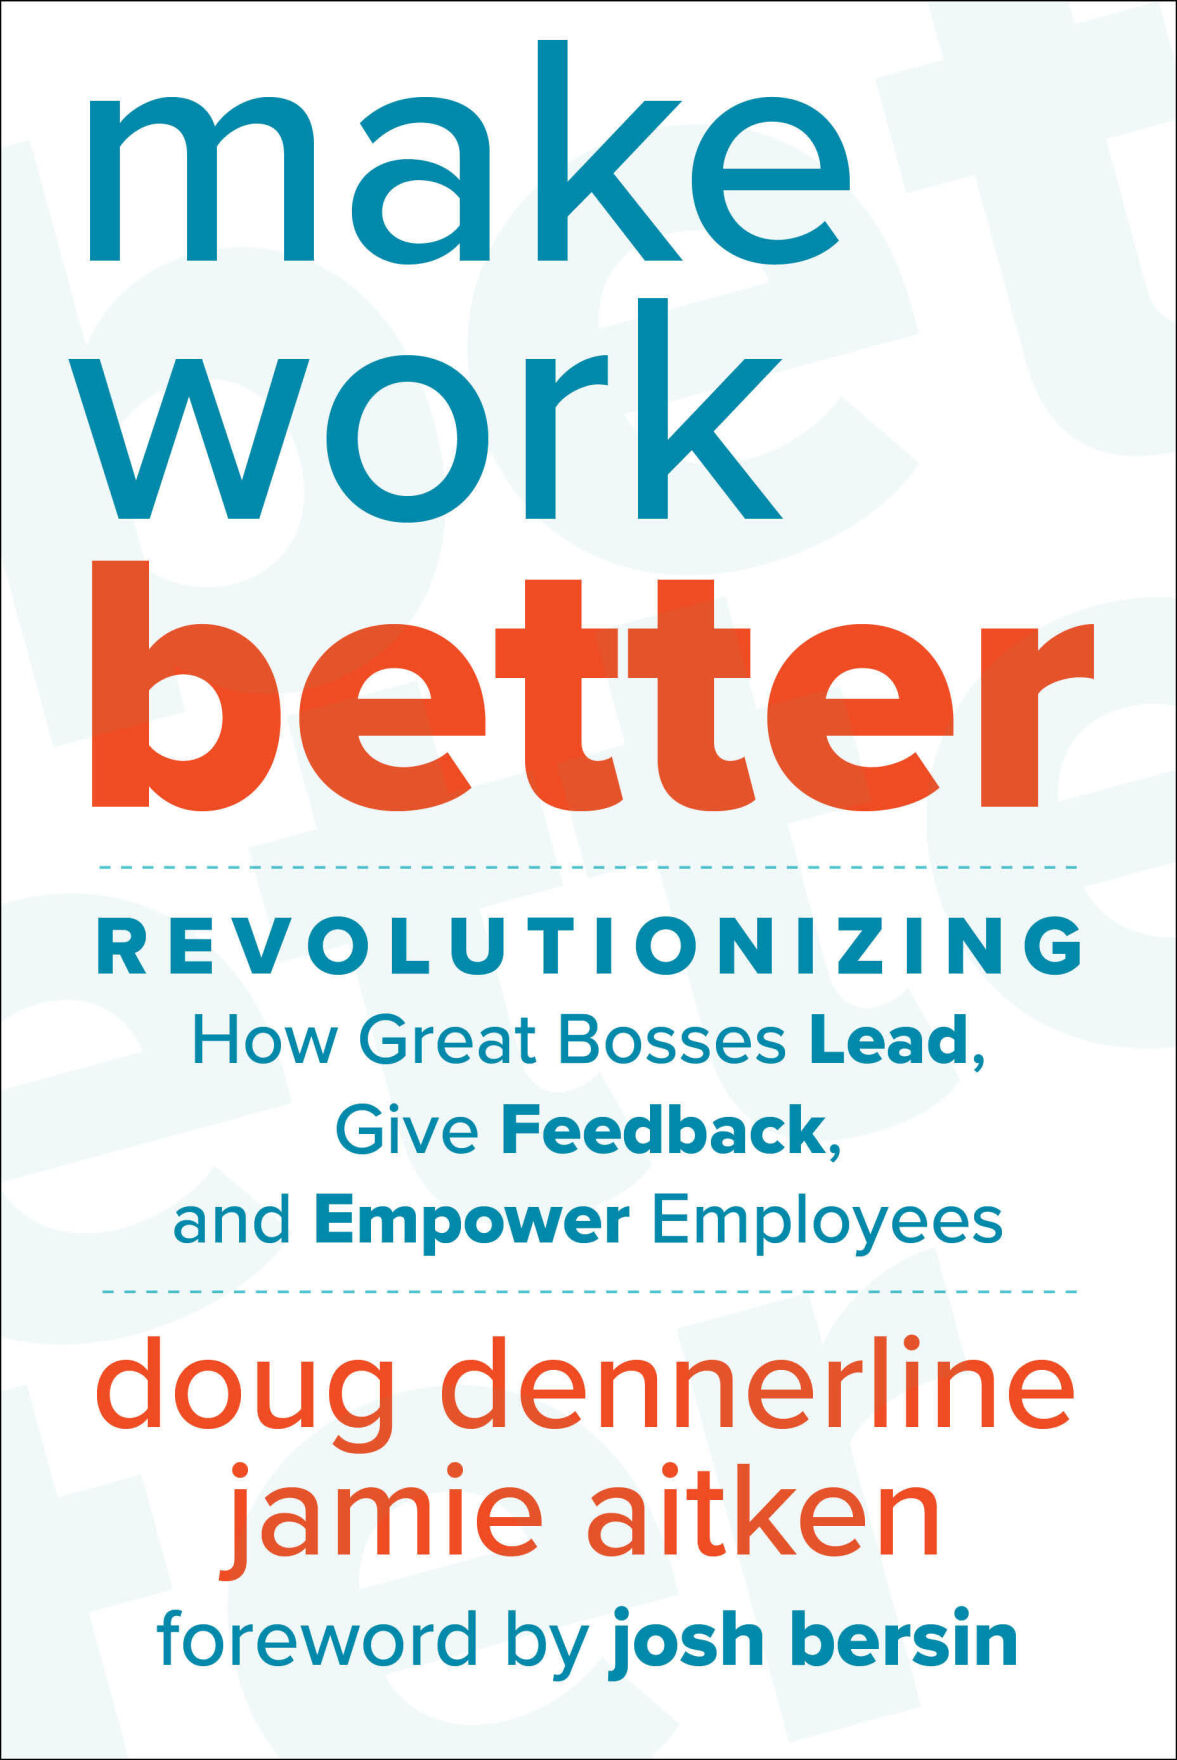 <p>Make Work Better: Revolutionizing How Great Bosses Lead, Give Feedback, and Empower Employees by Doug Dennerline and Jamie Aitken. Available now at all major retailers. (Photo: Business Wire)</p>   PHOTO CREDIT: Business Wire